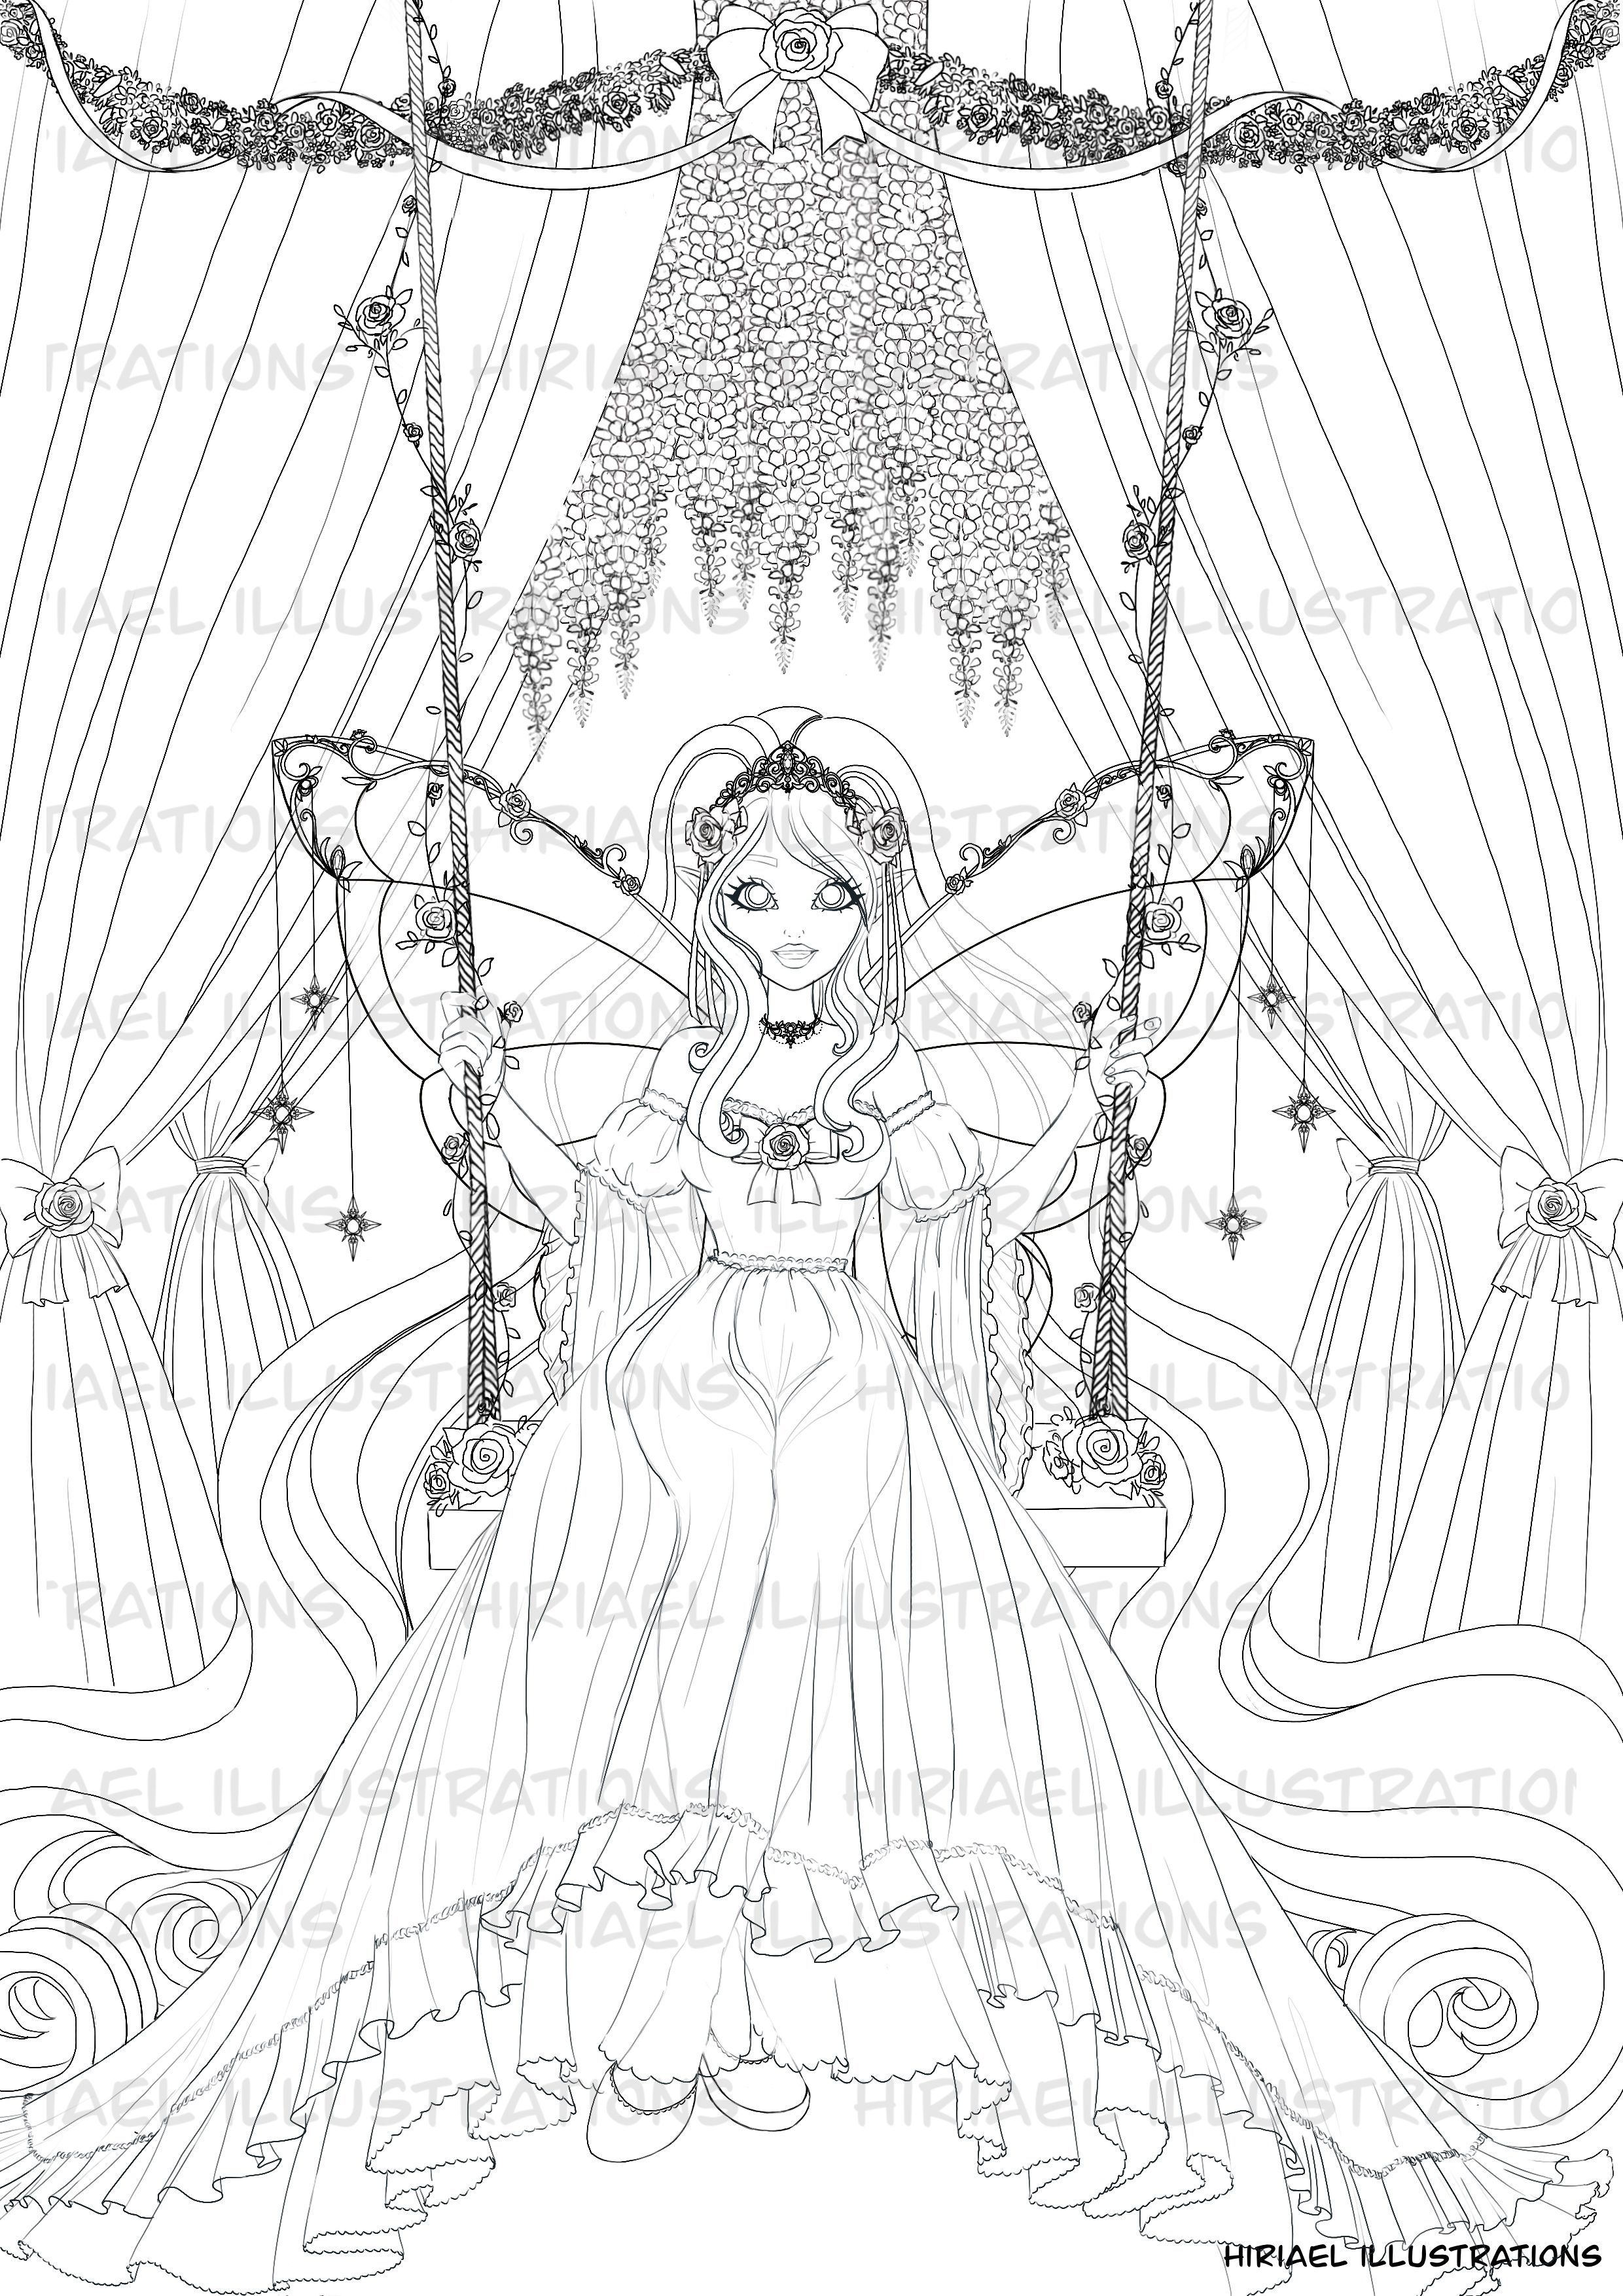 Fairy on swing coloring page by hiriaelillustrations on